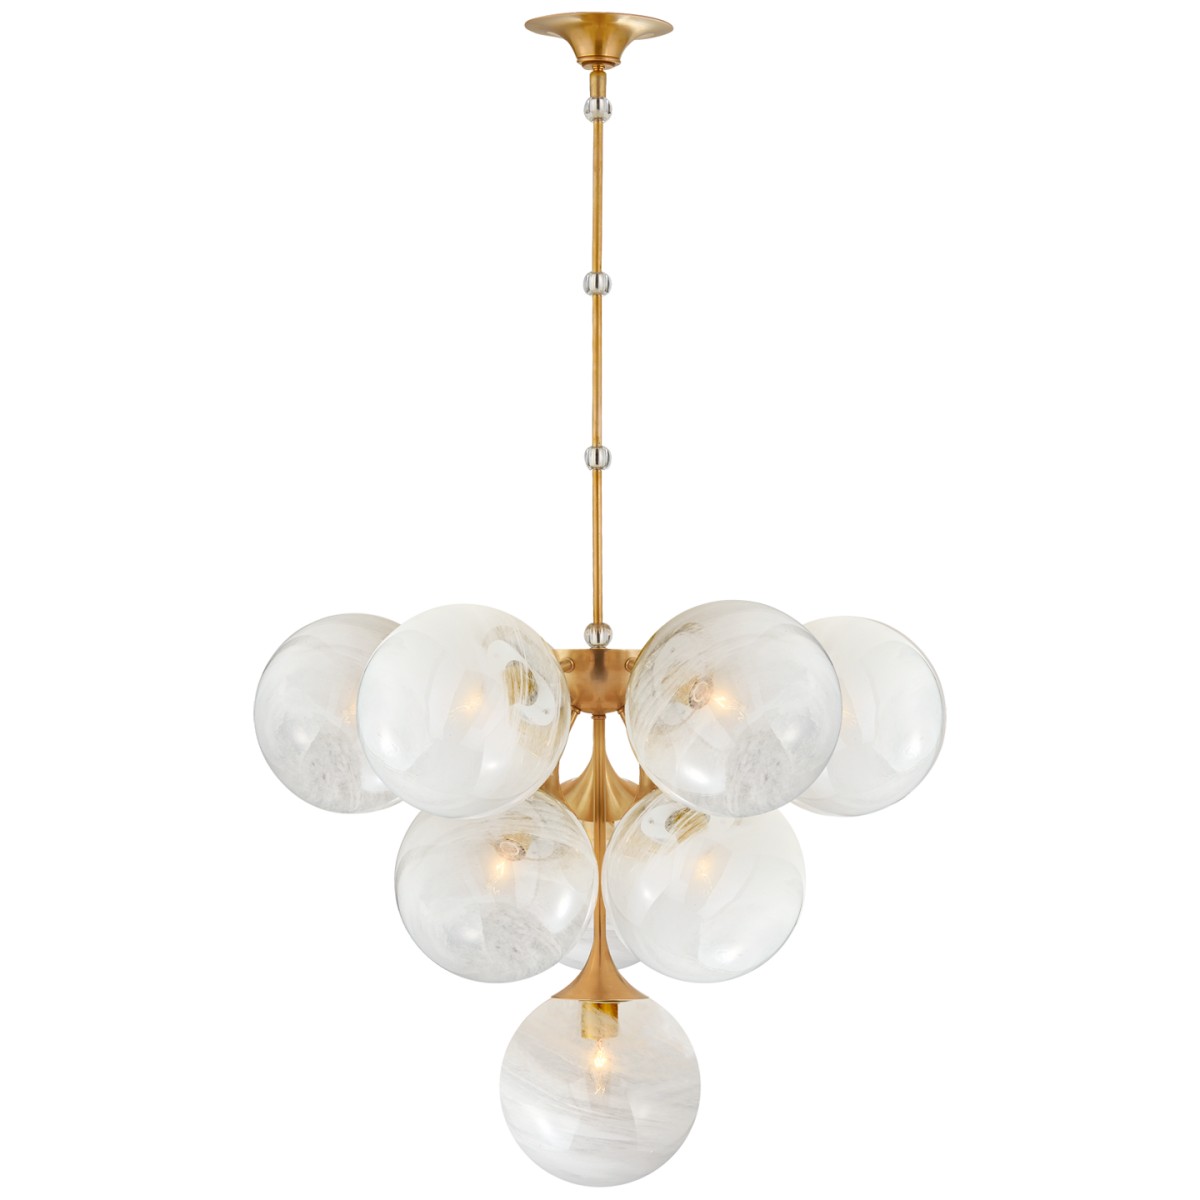 Cristol Tiered Chandelier With White Strie Glass | Highlight image